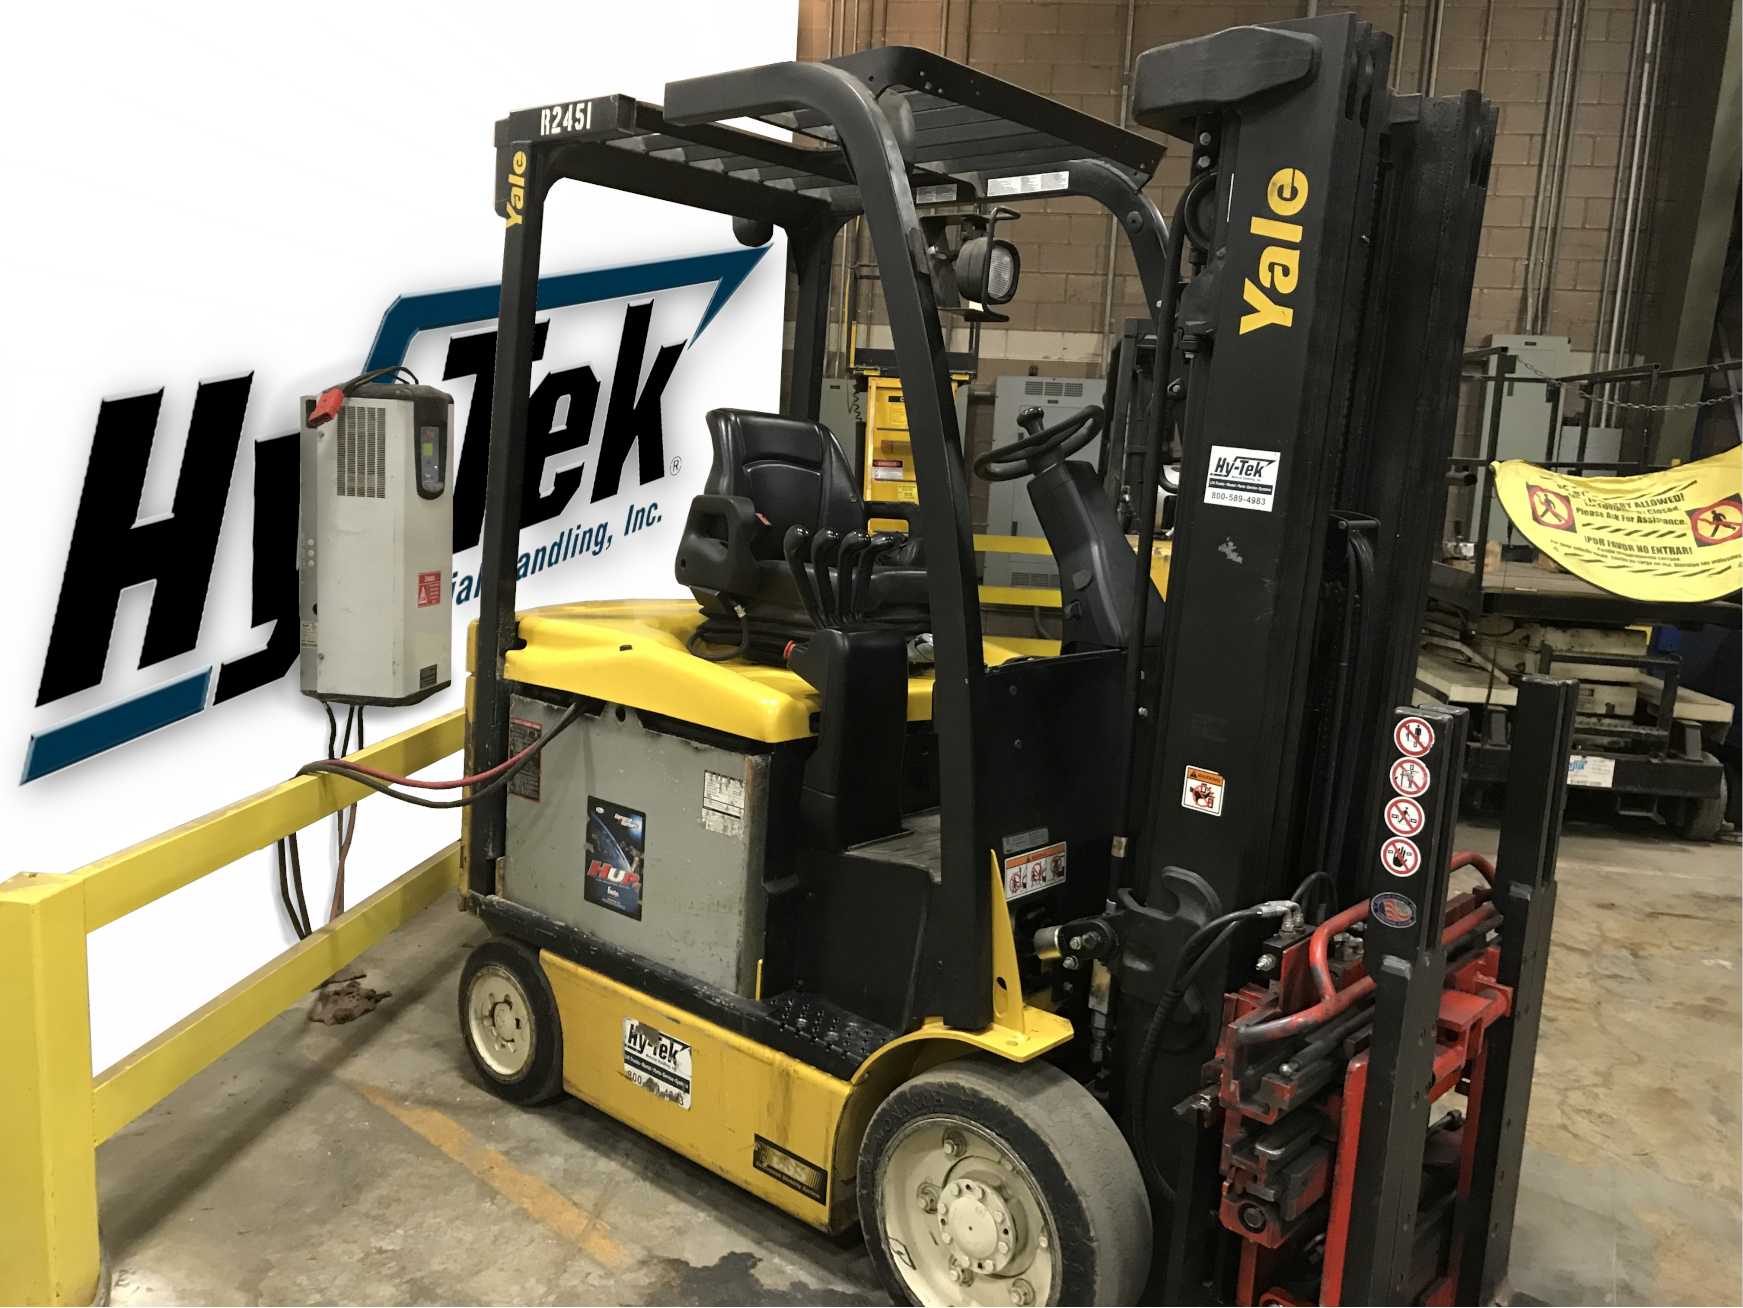 2014 Yale Erc060vg Used Forklifts Near Me